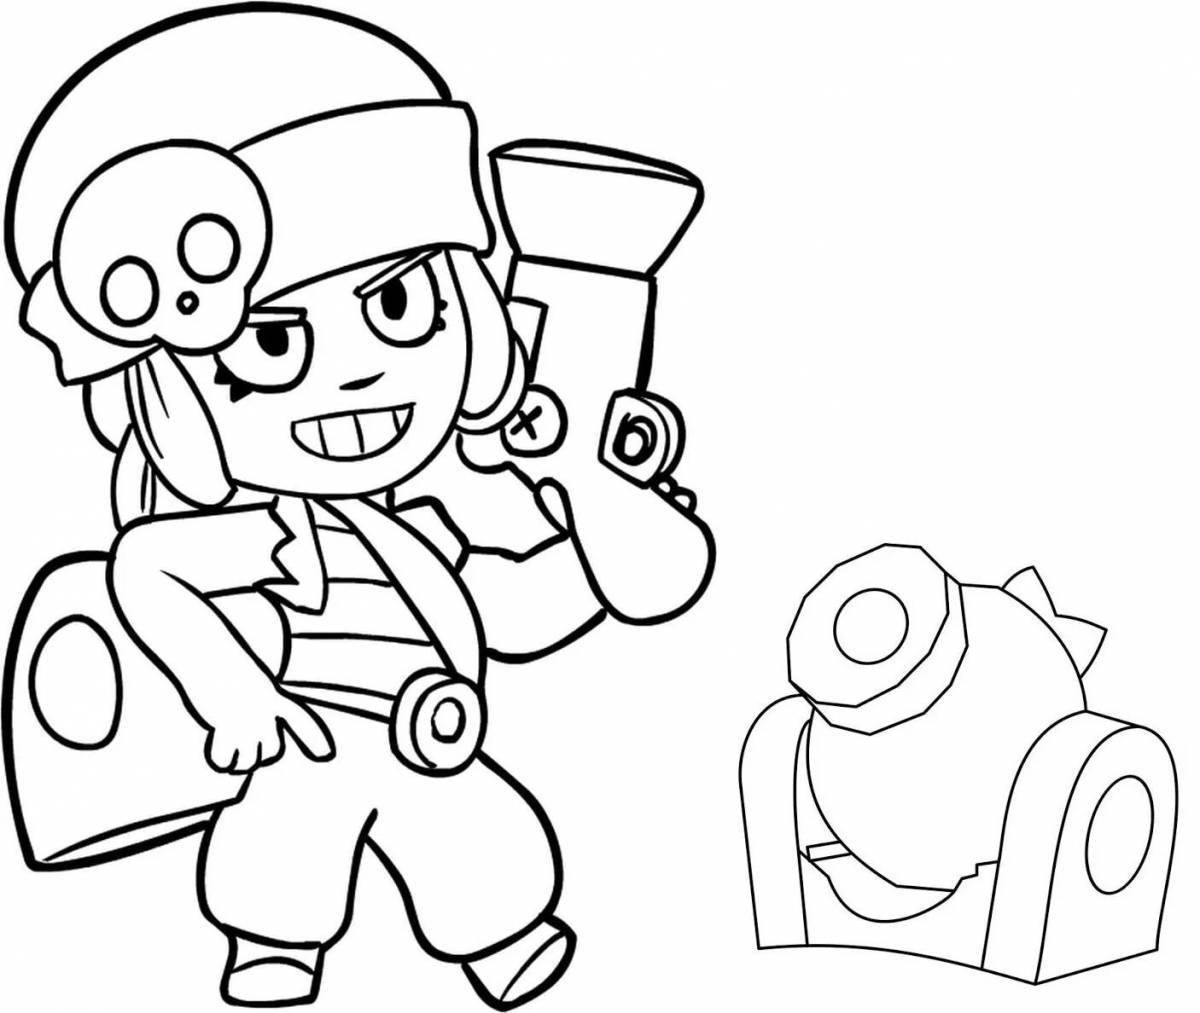 Perfect coloring sandy from brawl stars